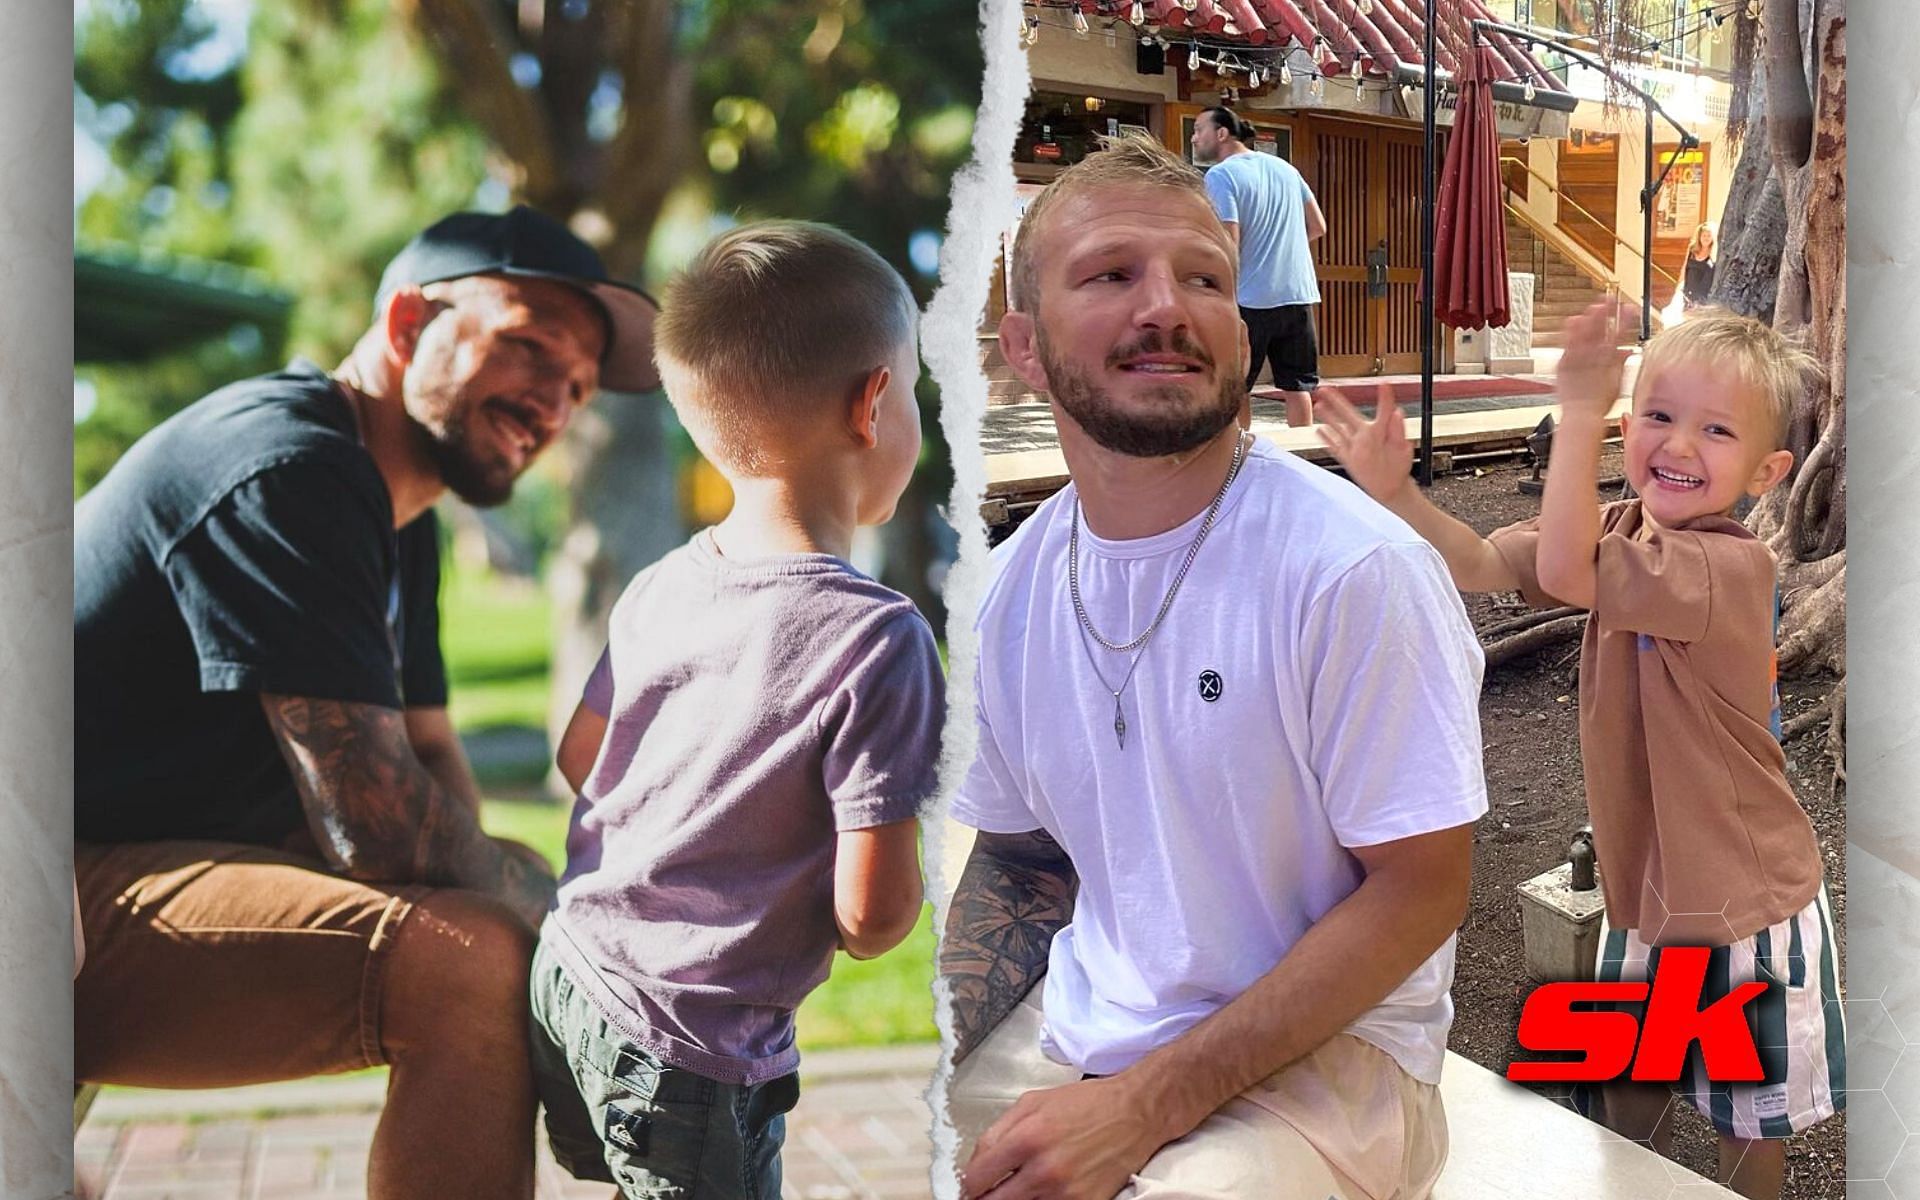 TJ Dillashaw with his 5-year-old son